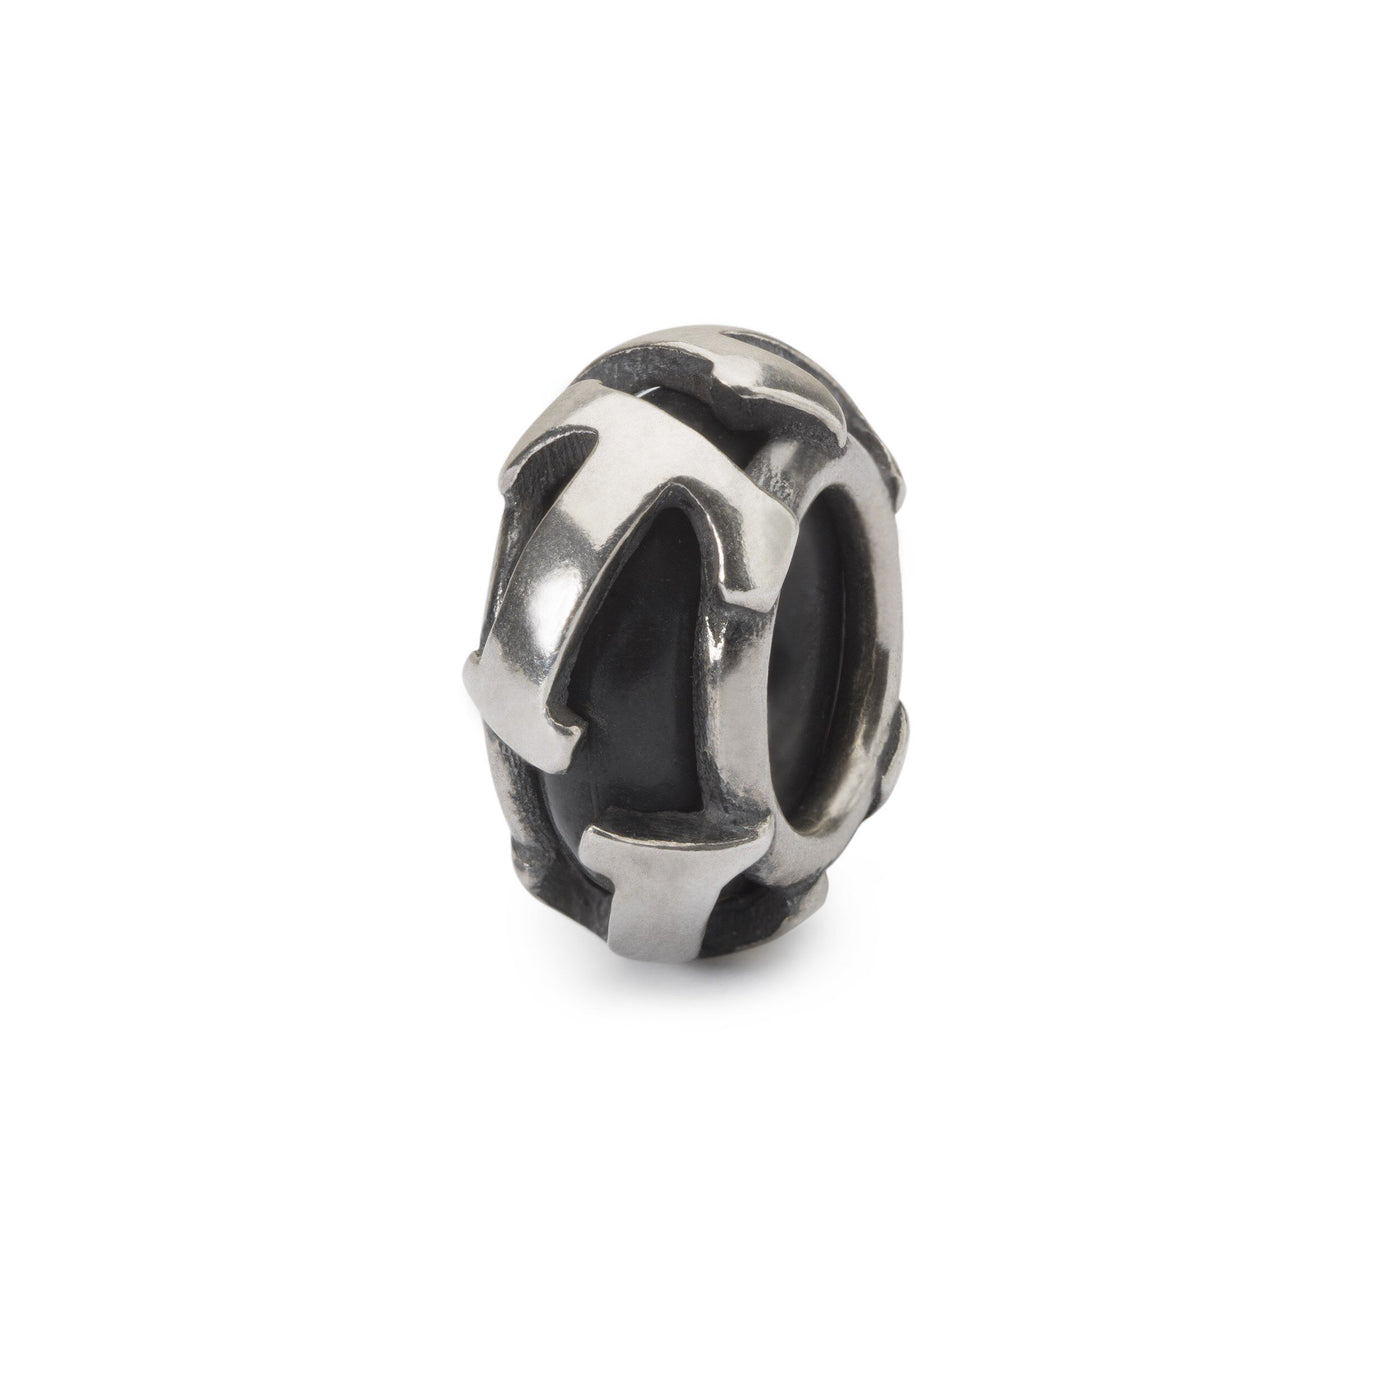 T Spacer - Trollbeads Canada